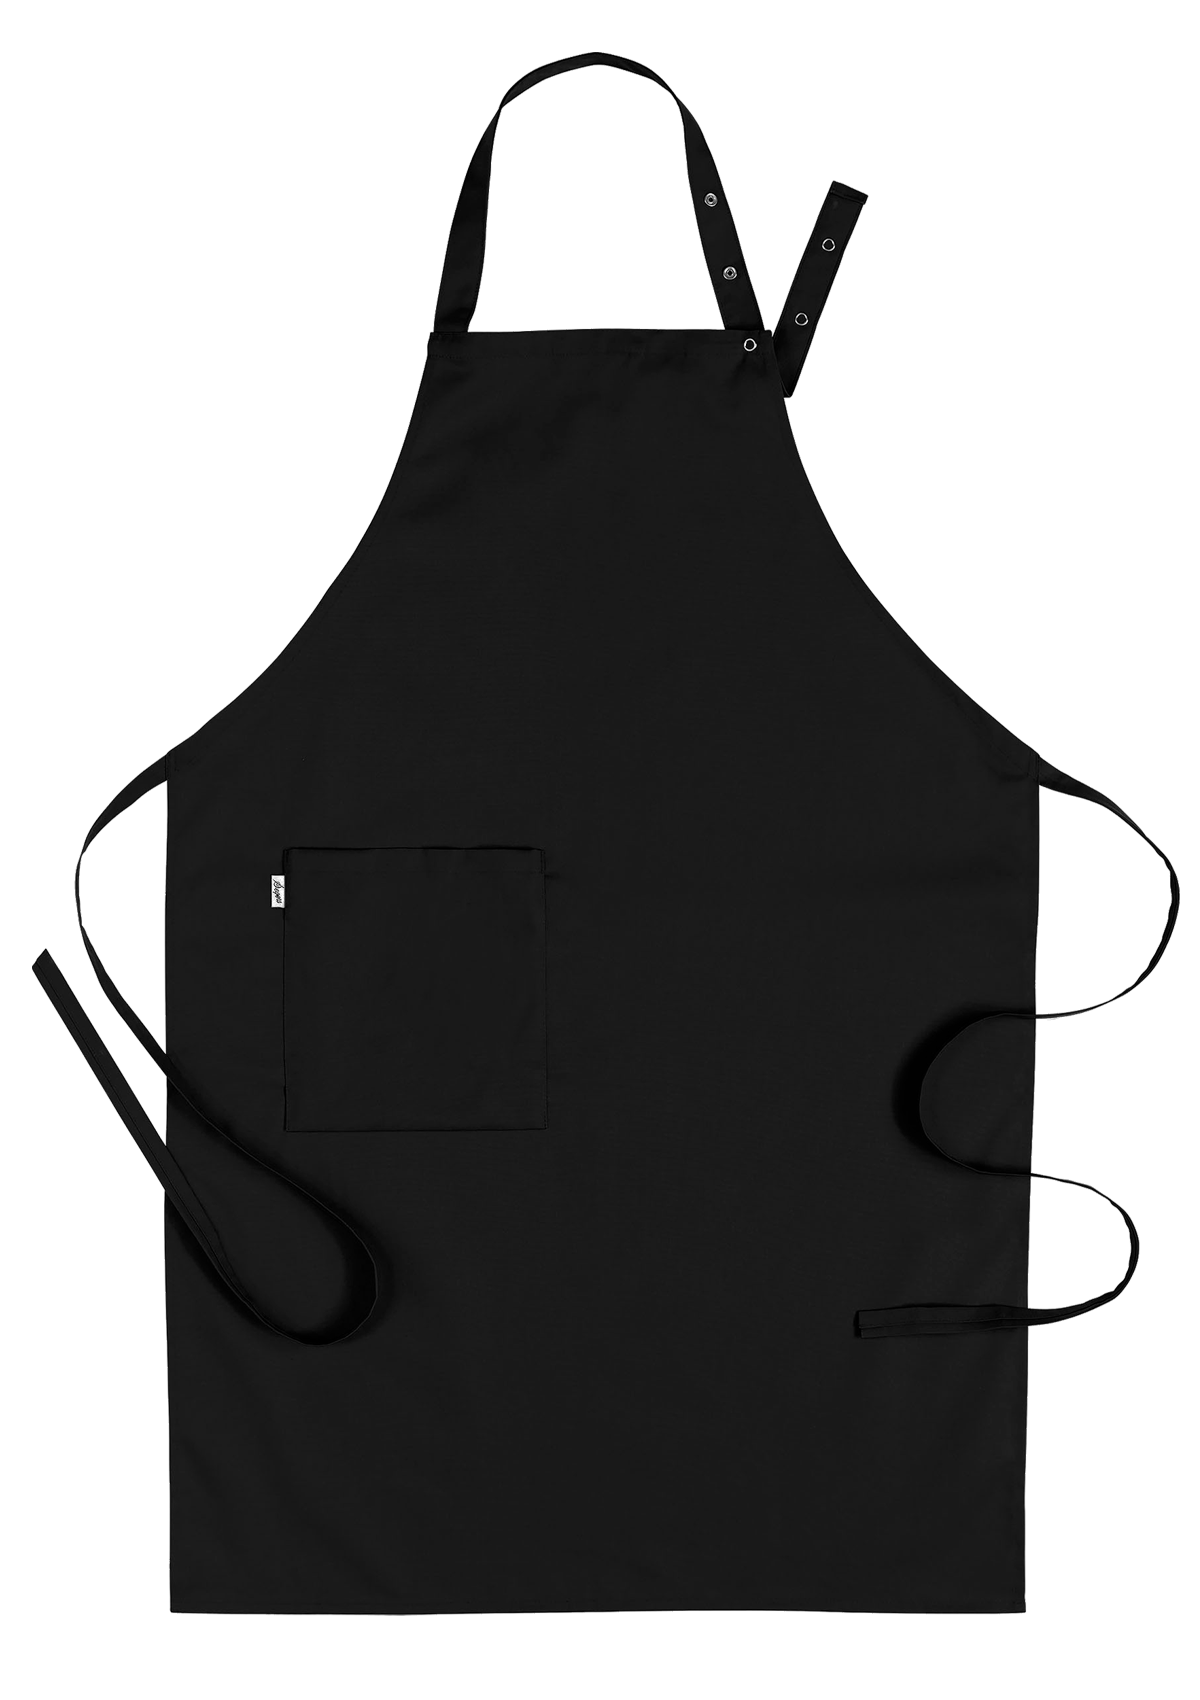 Unisex Bib Apron With Right Pocket. Segers | Cookniche